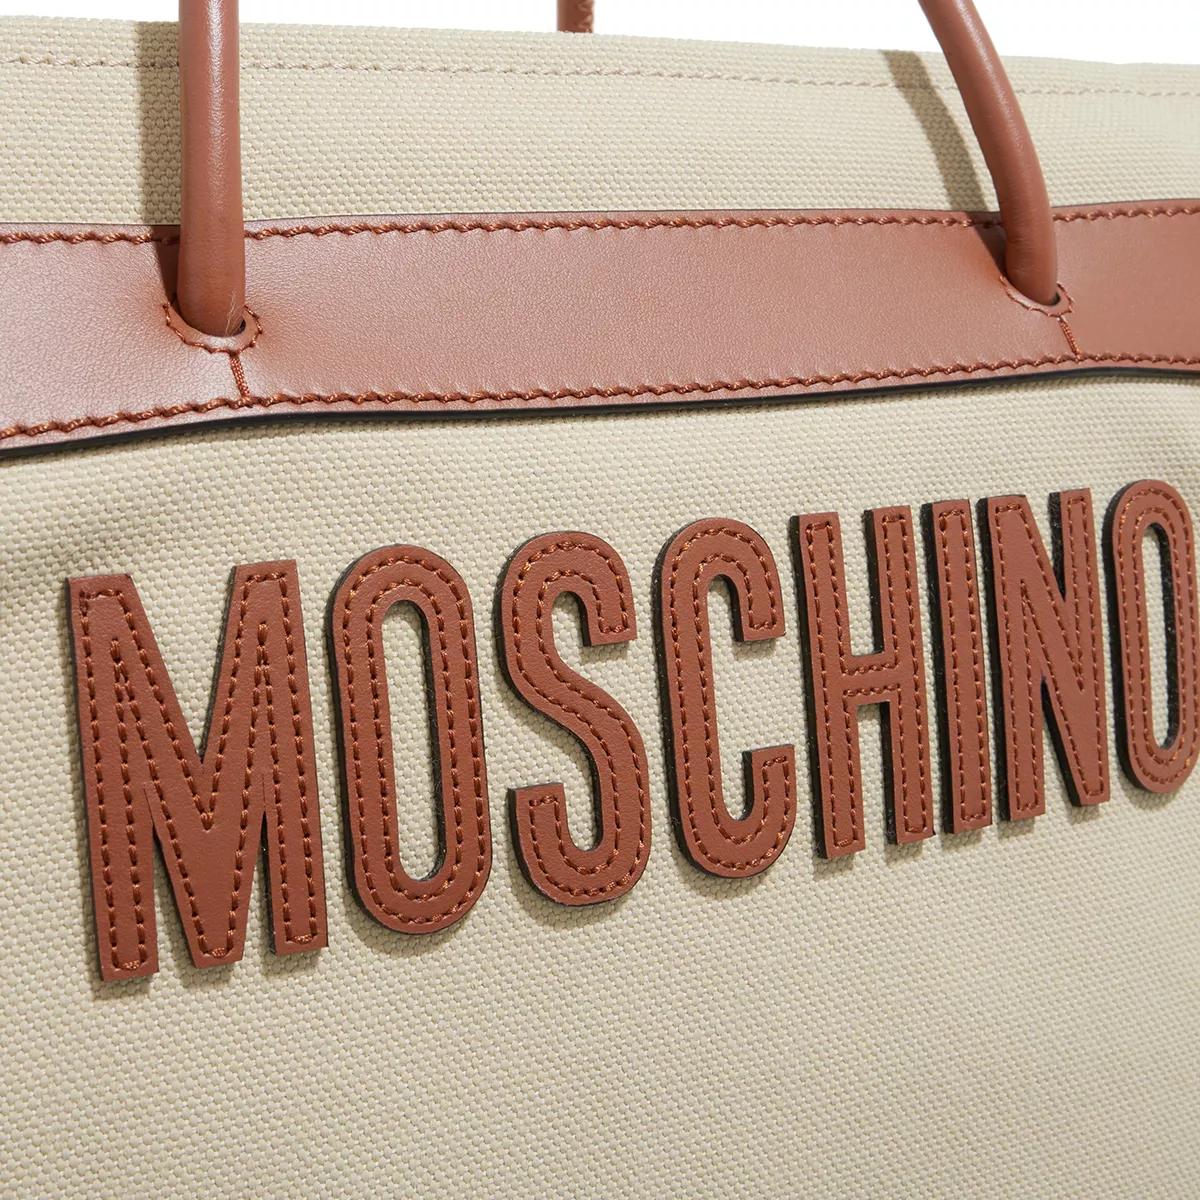 Moschino Totes Tote Shoulder Bag in beige